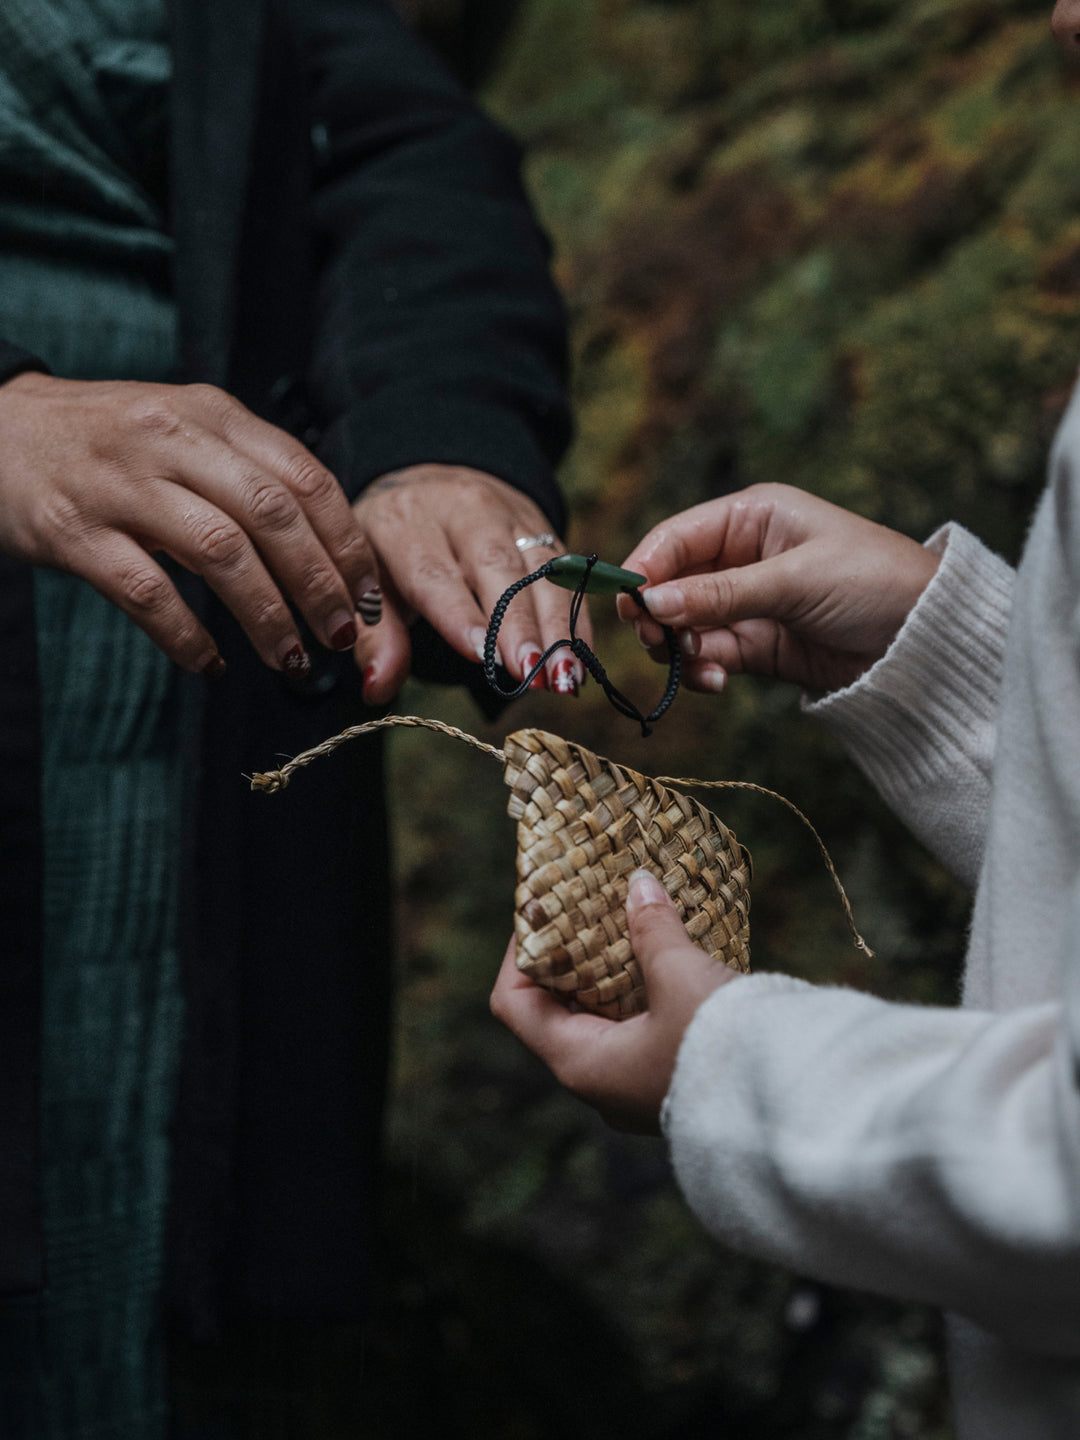 A pounamu greenstone bracelet being handed from one person to another